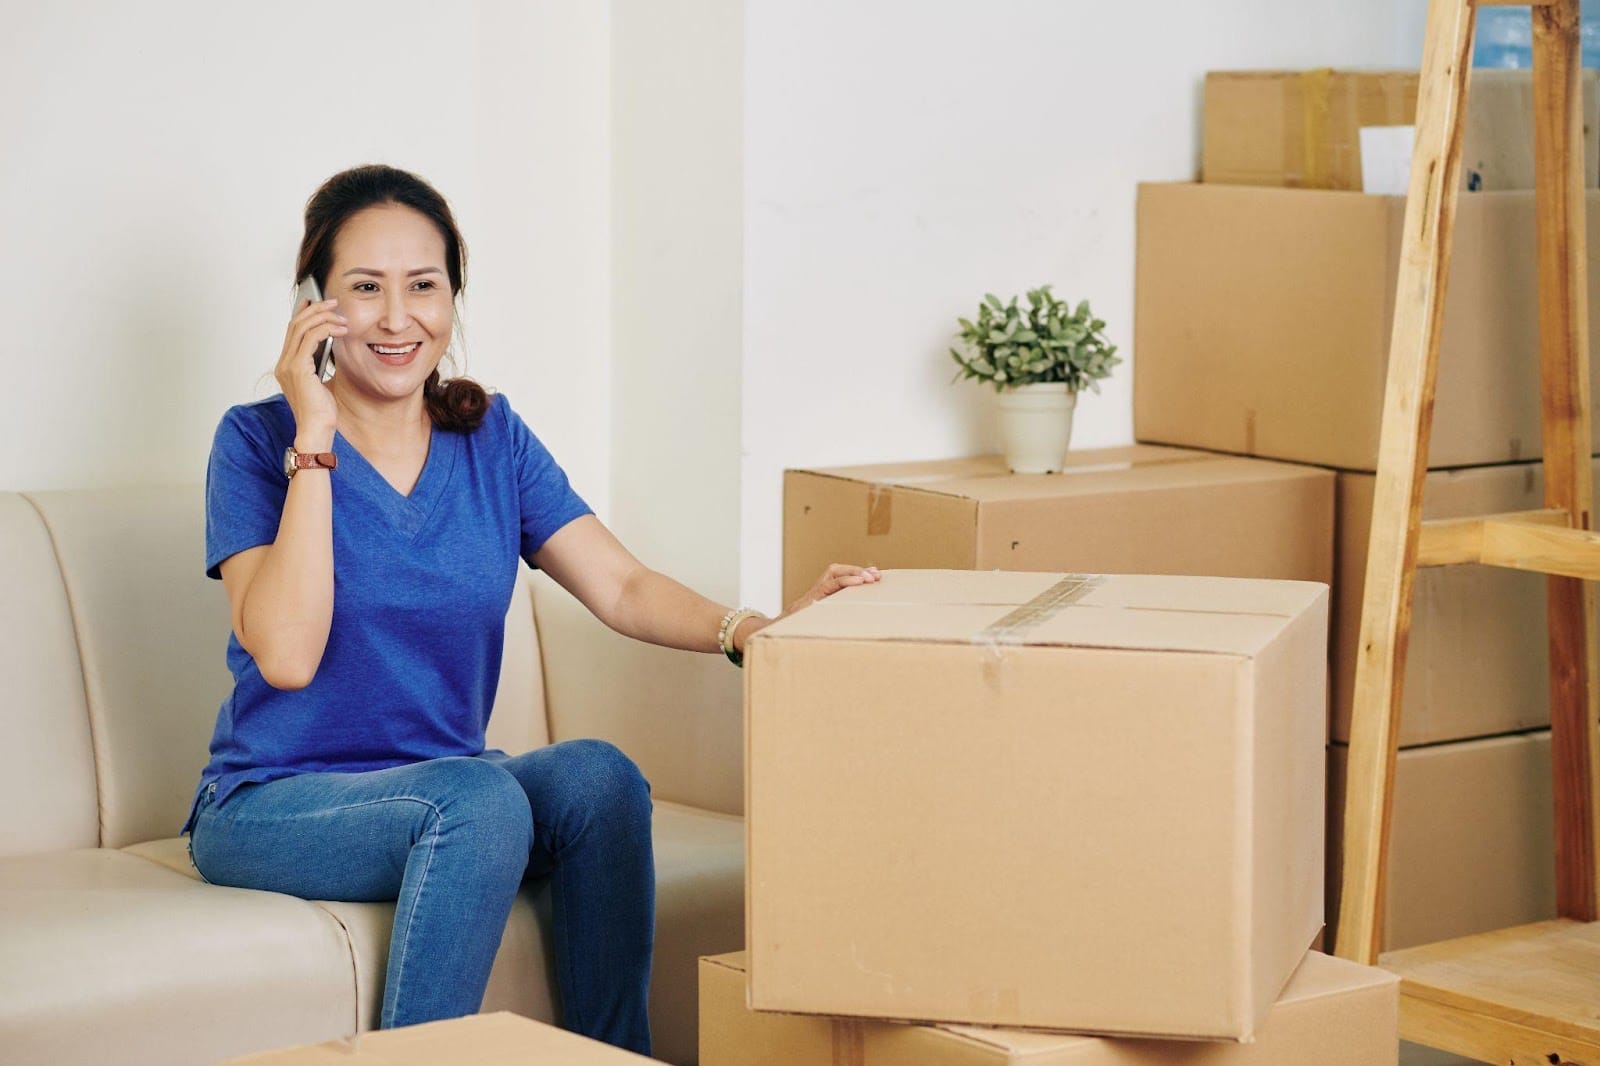 5 Things To Look For When Choosing a Moving Company